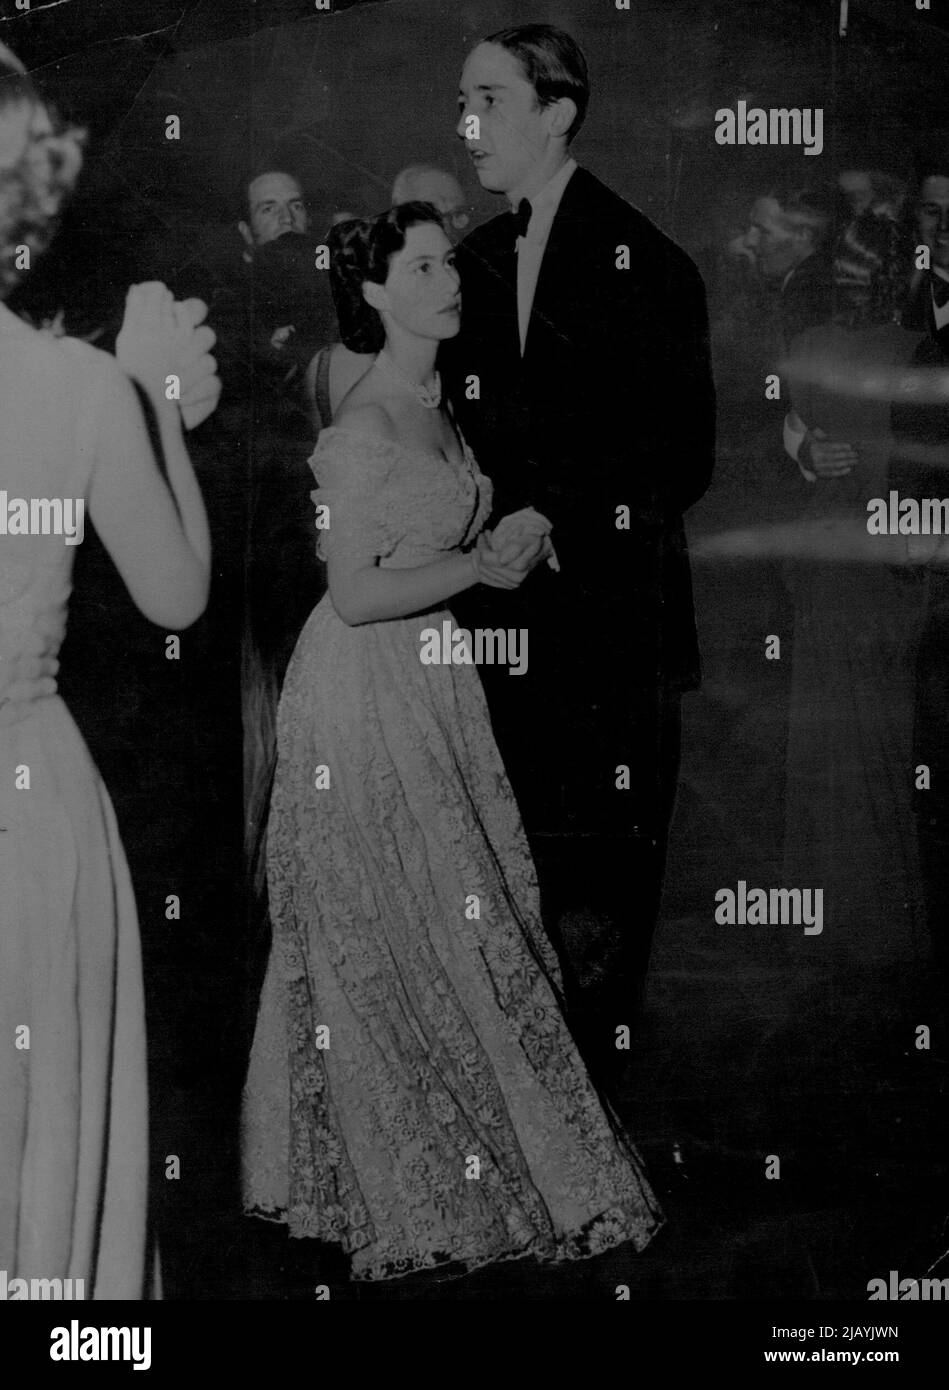 Princess Margaret dances the Samba ***** Dancing in 1948 with a lofty partner at a London ball. December 22, 1948. (Photo by The Associated Press Ltd.). Stock Photo